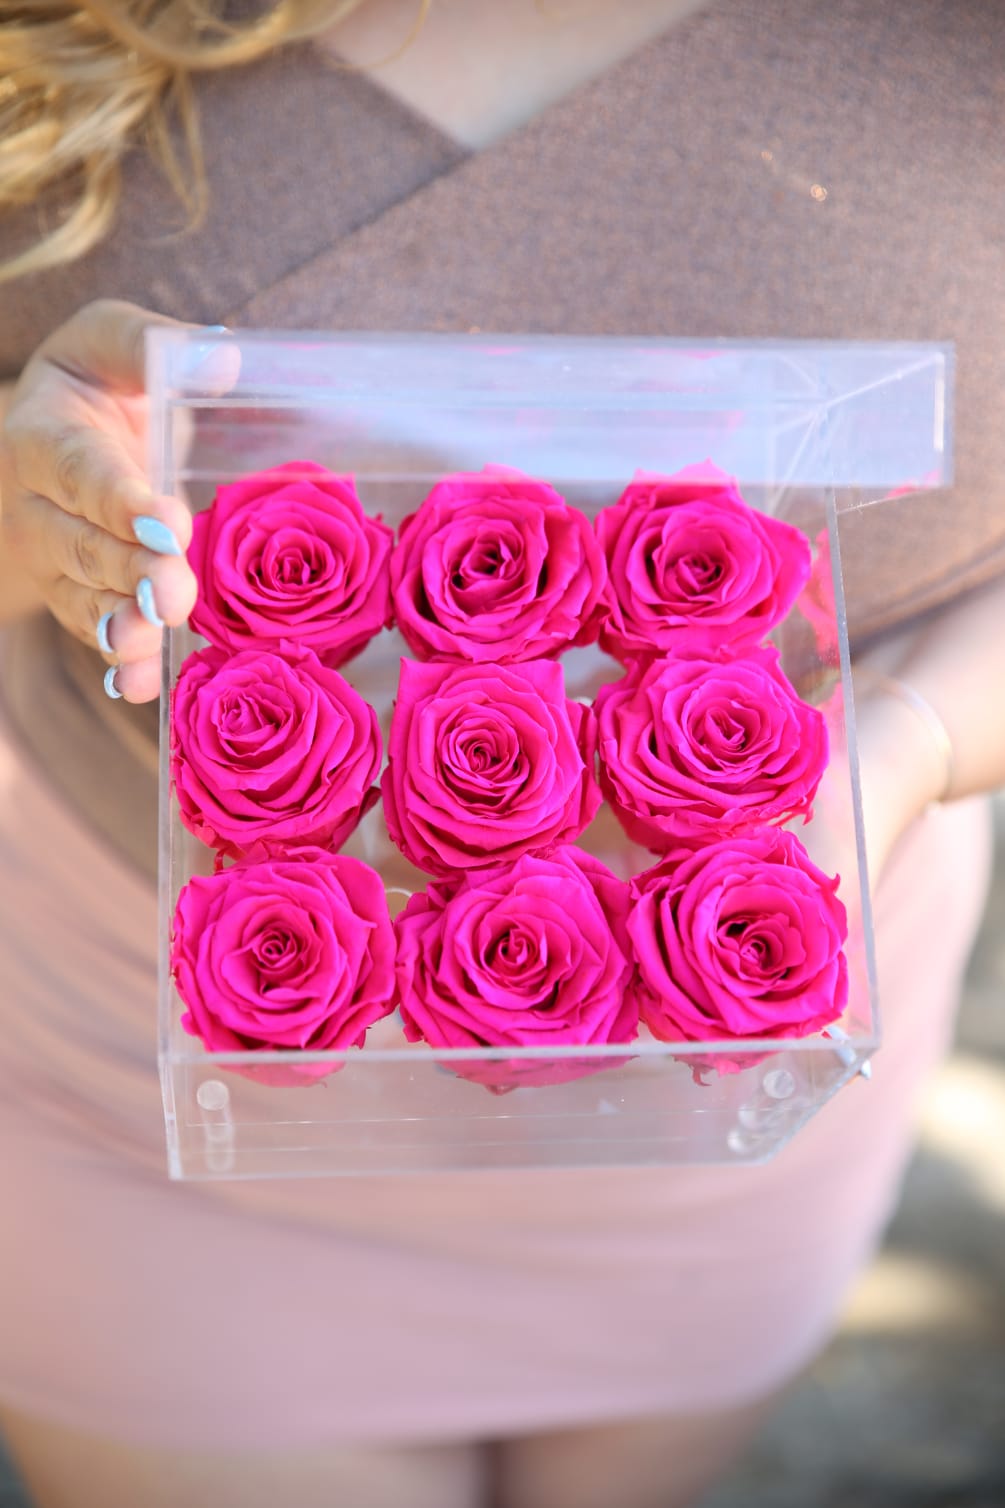 Meet our everlasting roses! These are REAL roses that can last for